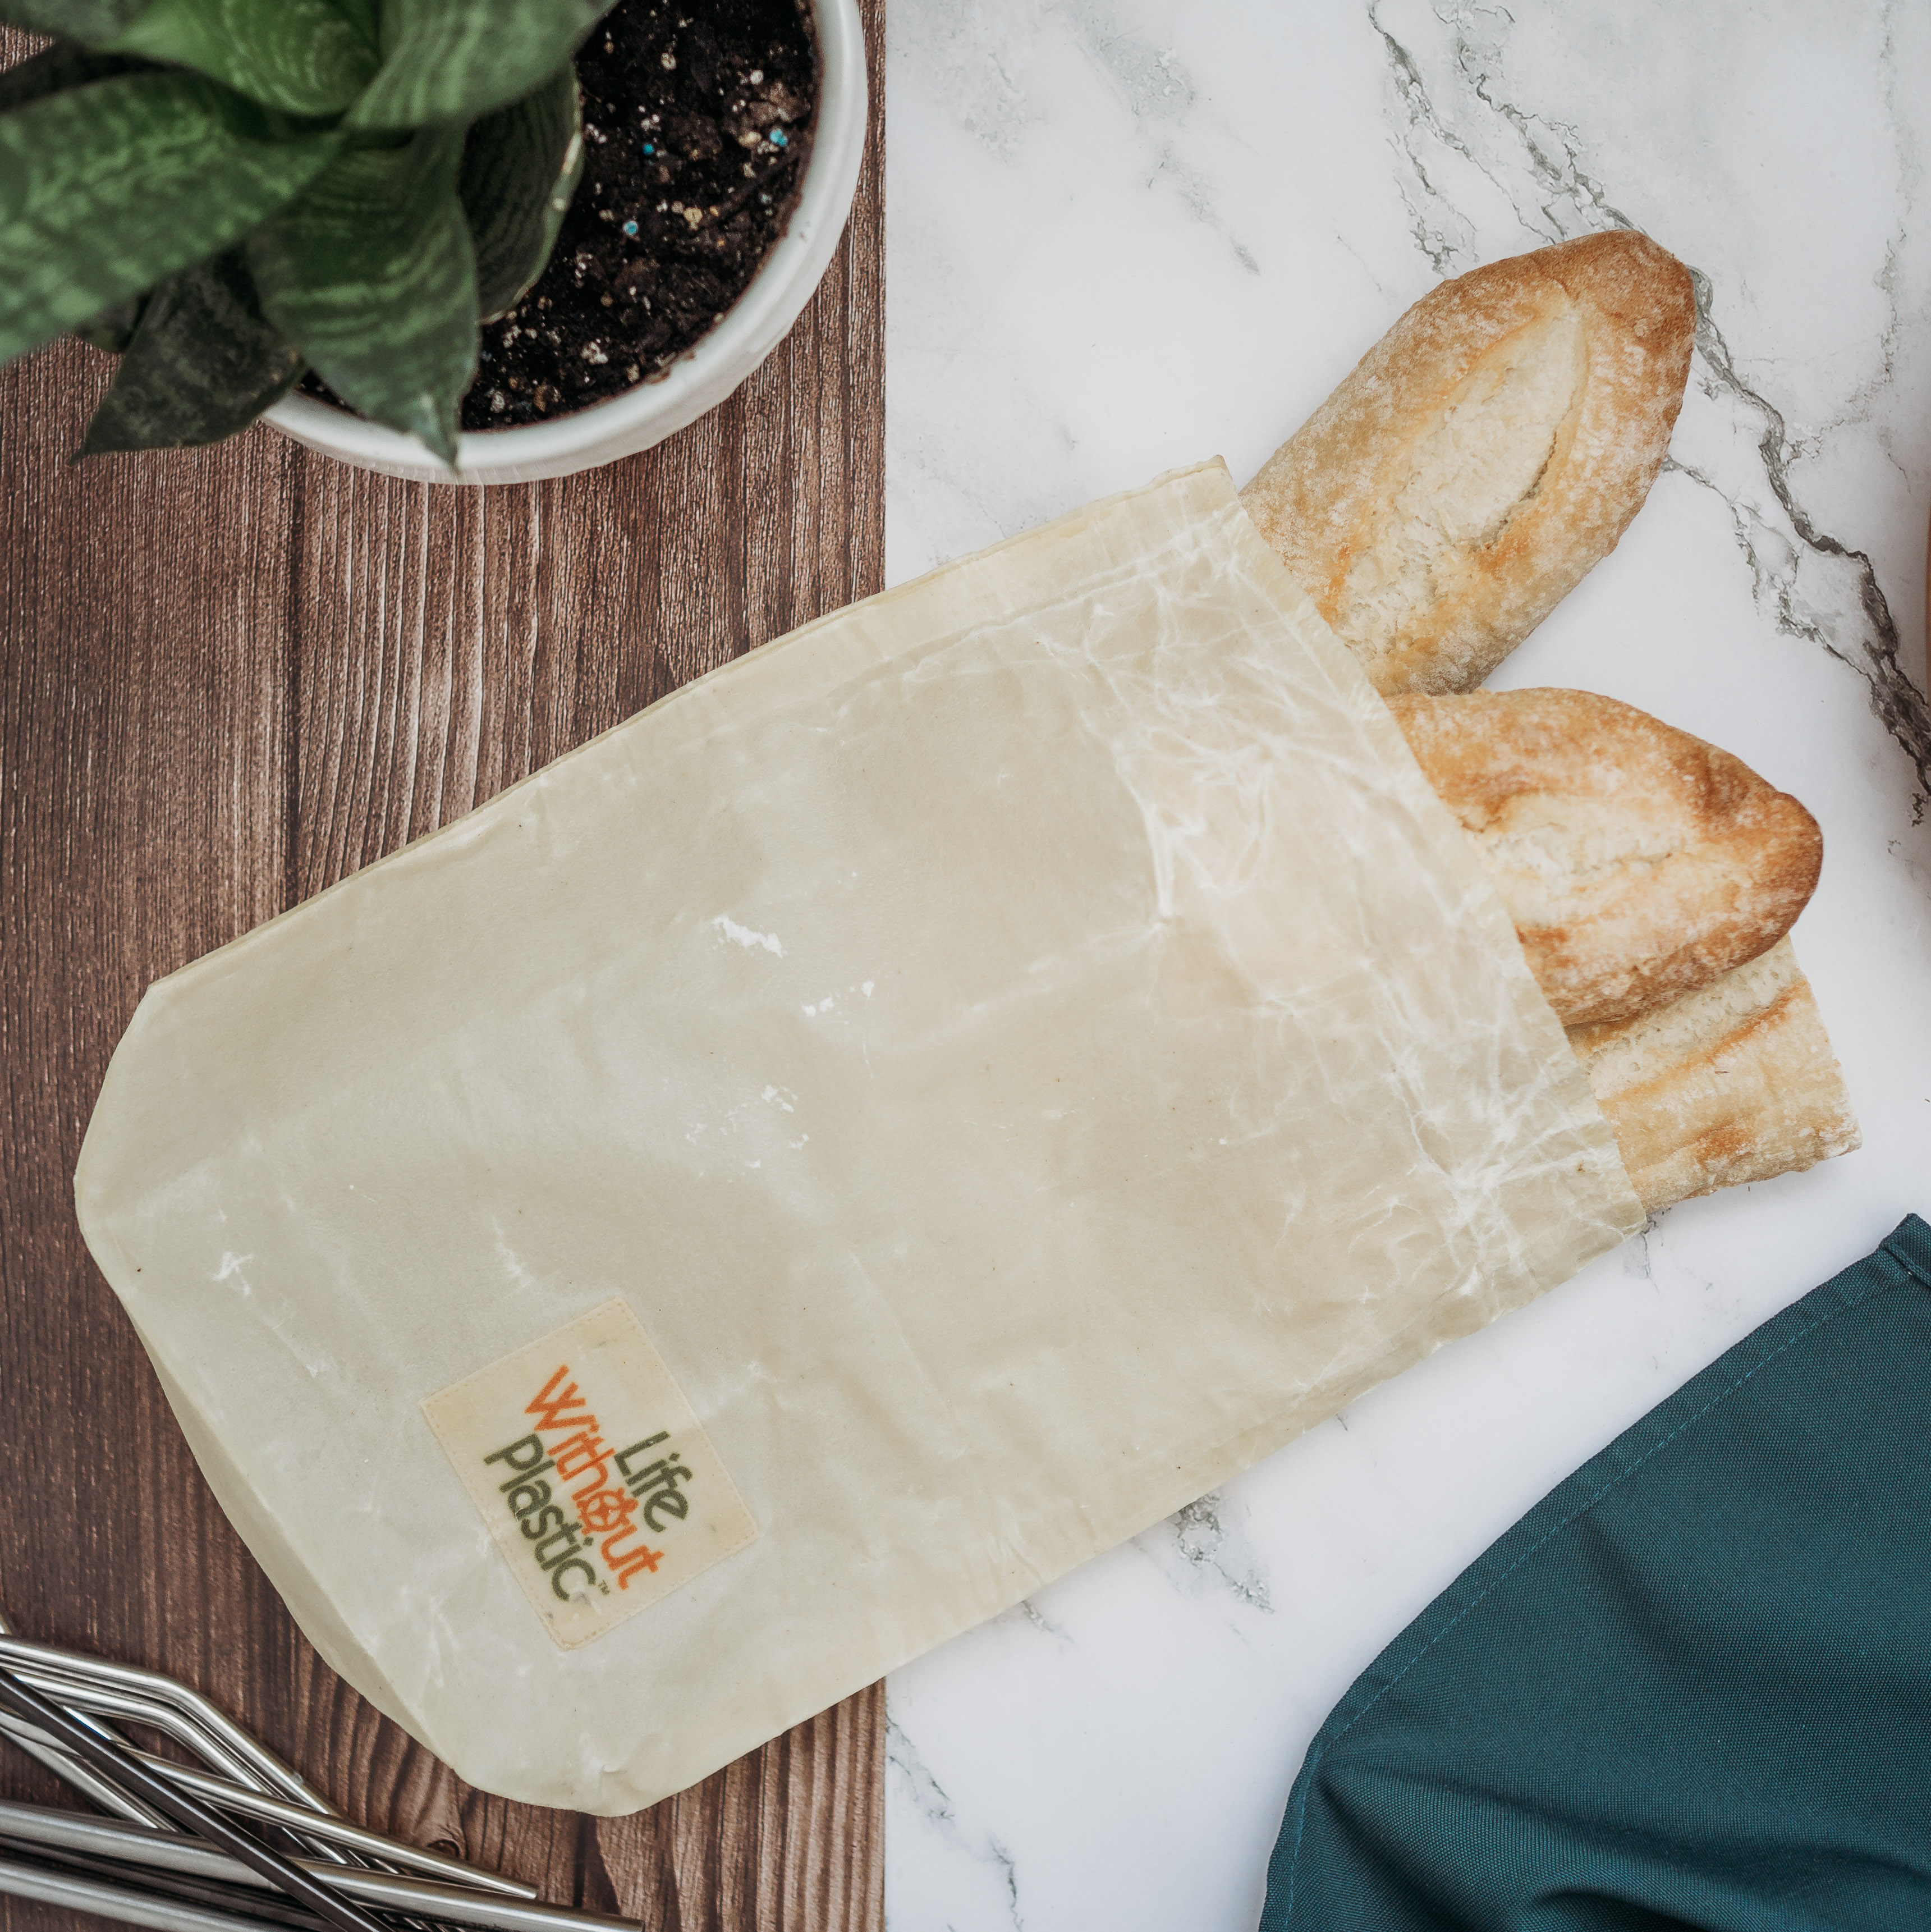 beeswax bag with bread